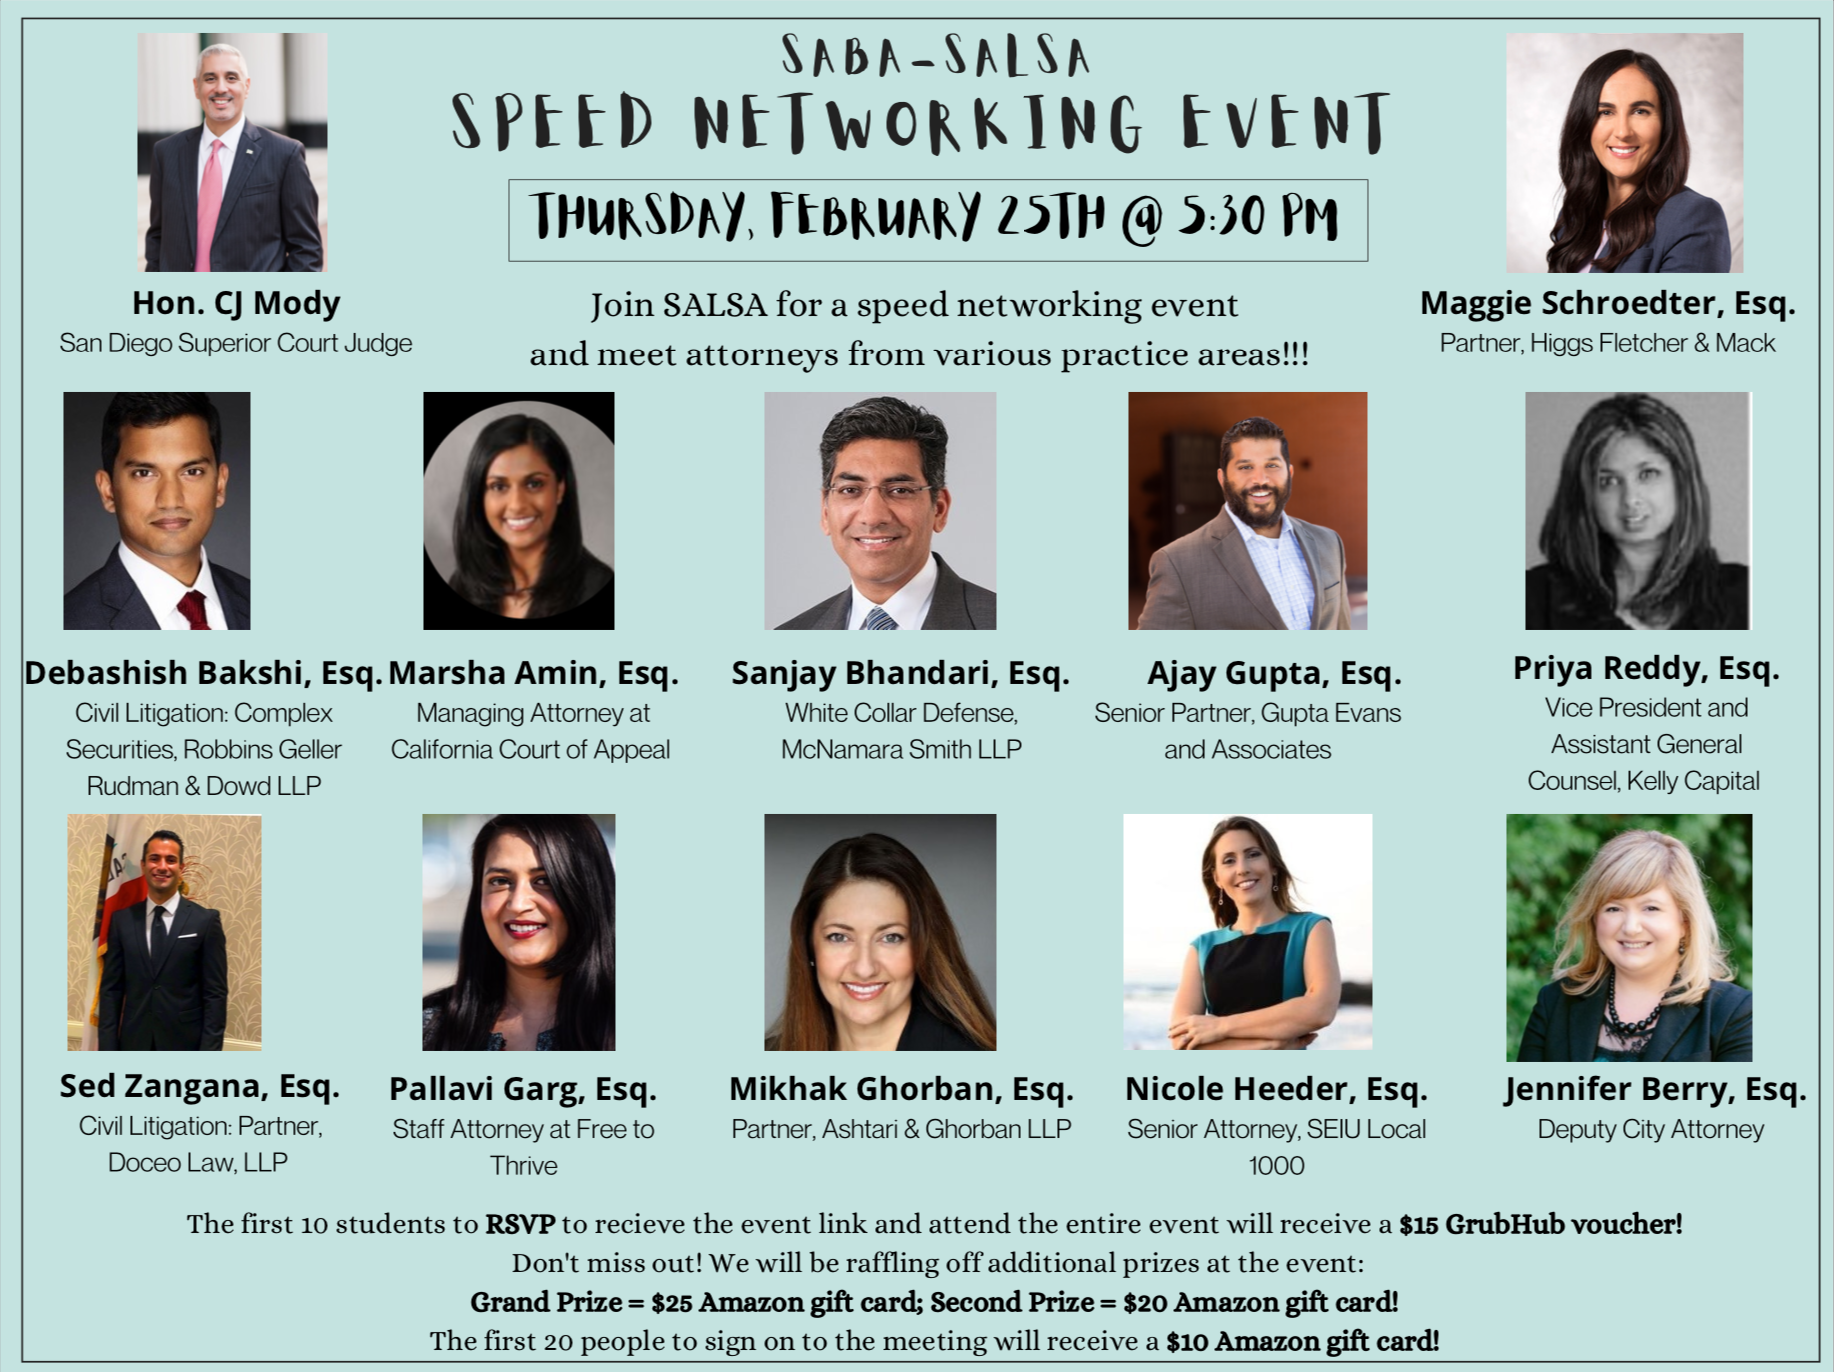 SABA Alasa spped networking event flyer